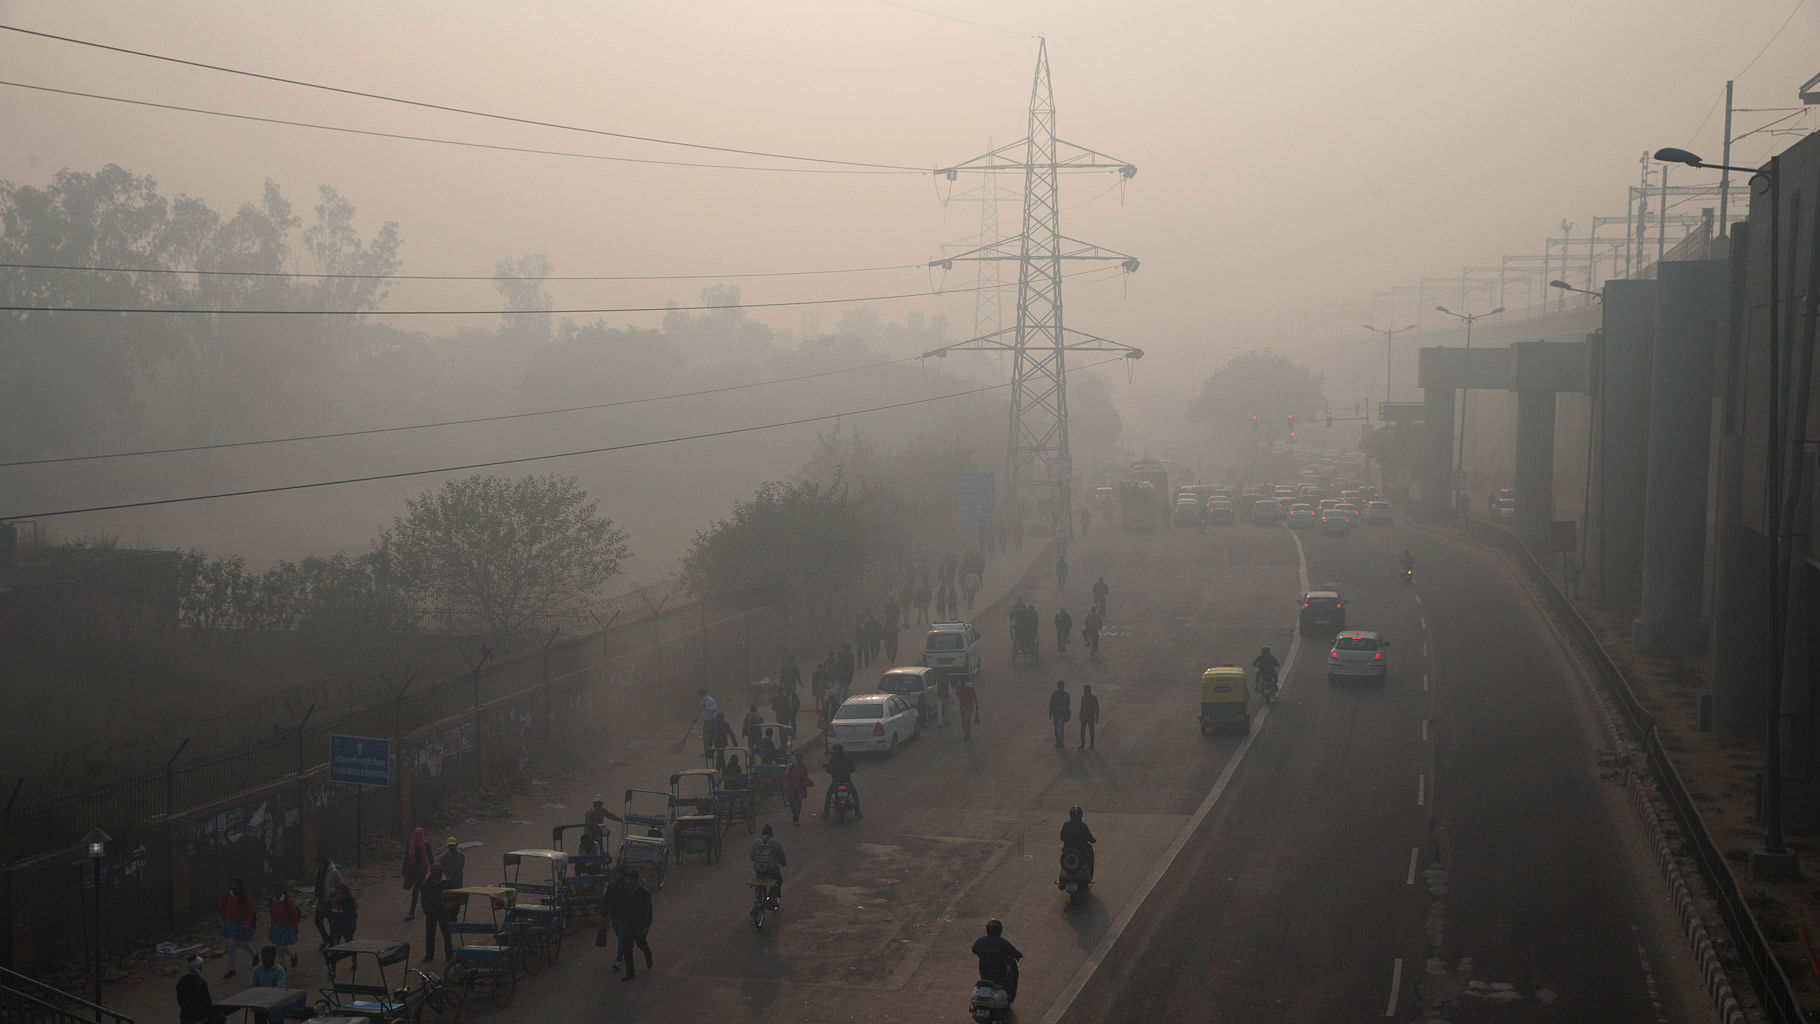 An IIT-Kanpur study could help pinpoint the sources of Delhi’s air pollution. (Photo: AP)